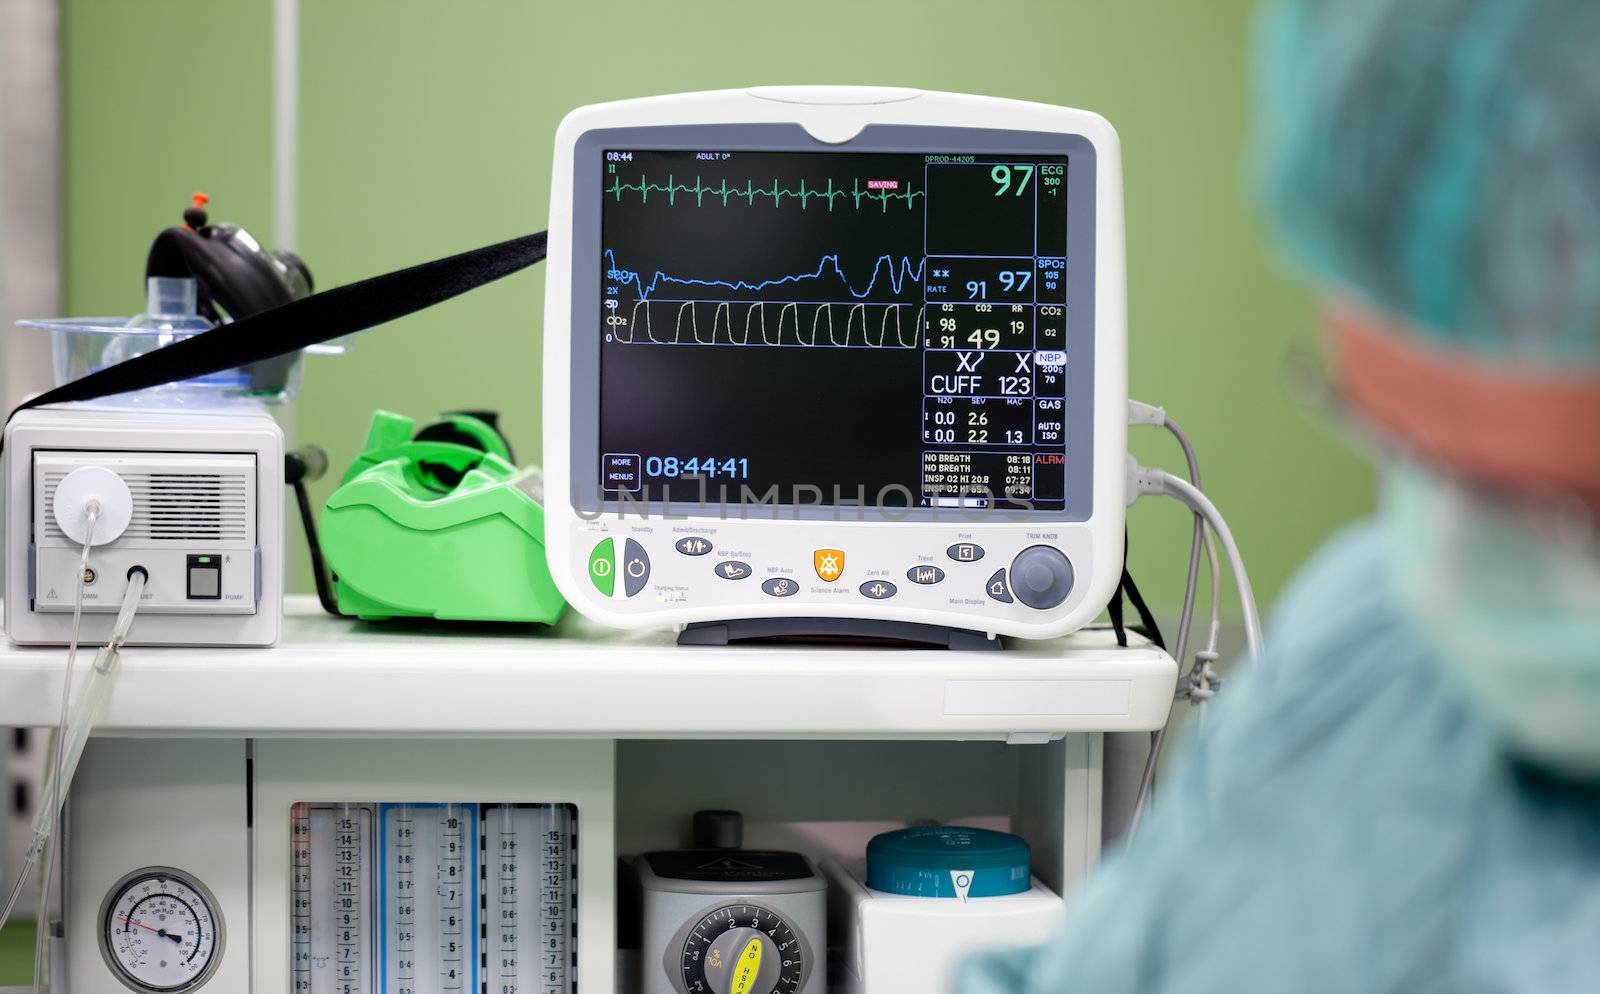 Cardiogram monitor during surgery in operation room